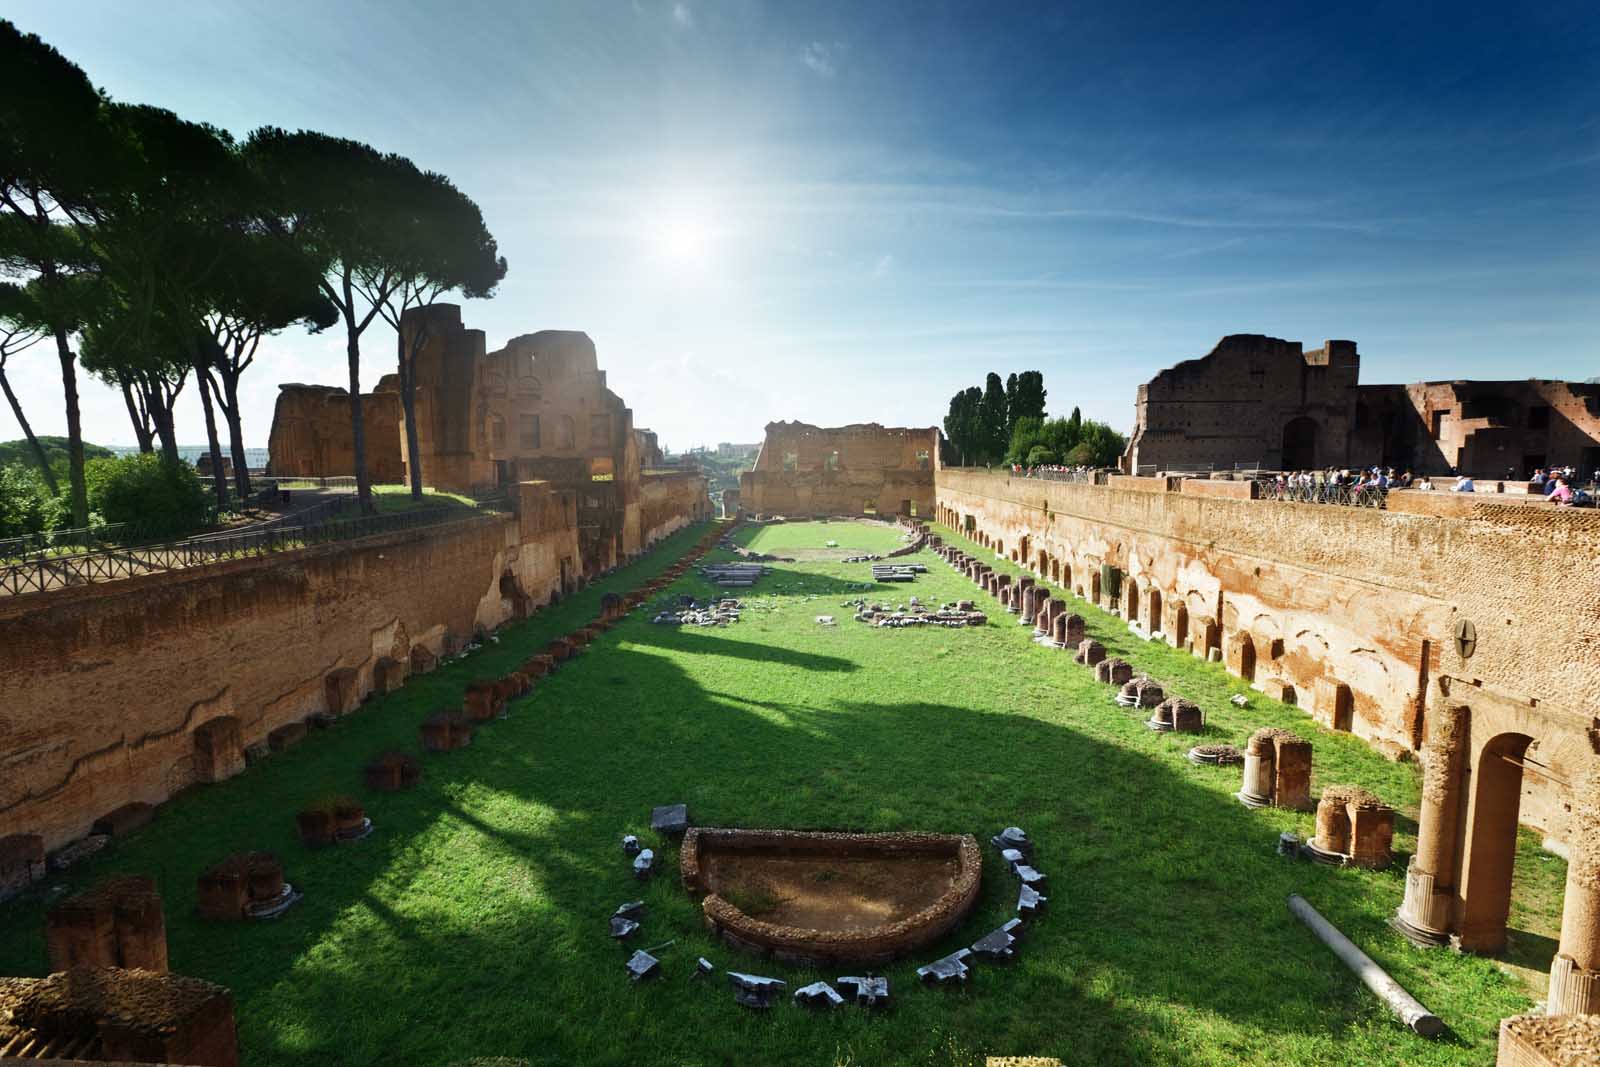 Visiting Palatine Hill in the afternoon on our one day in rome